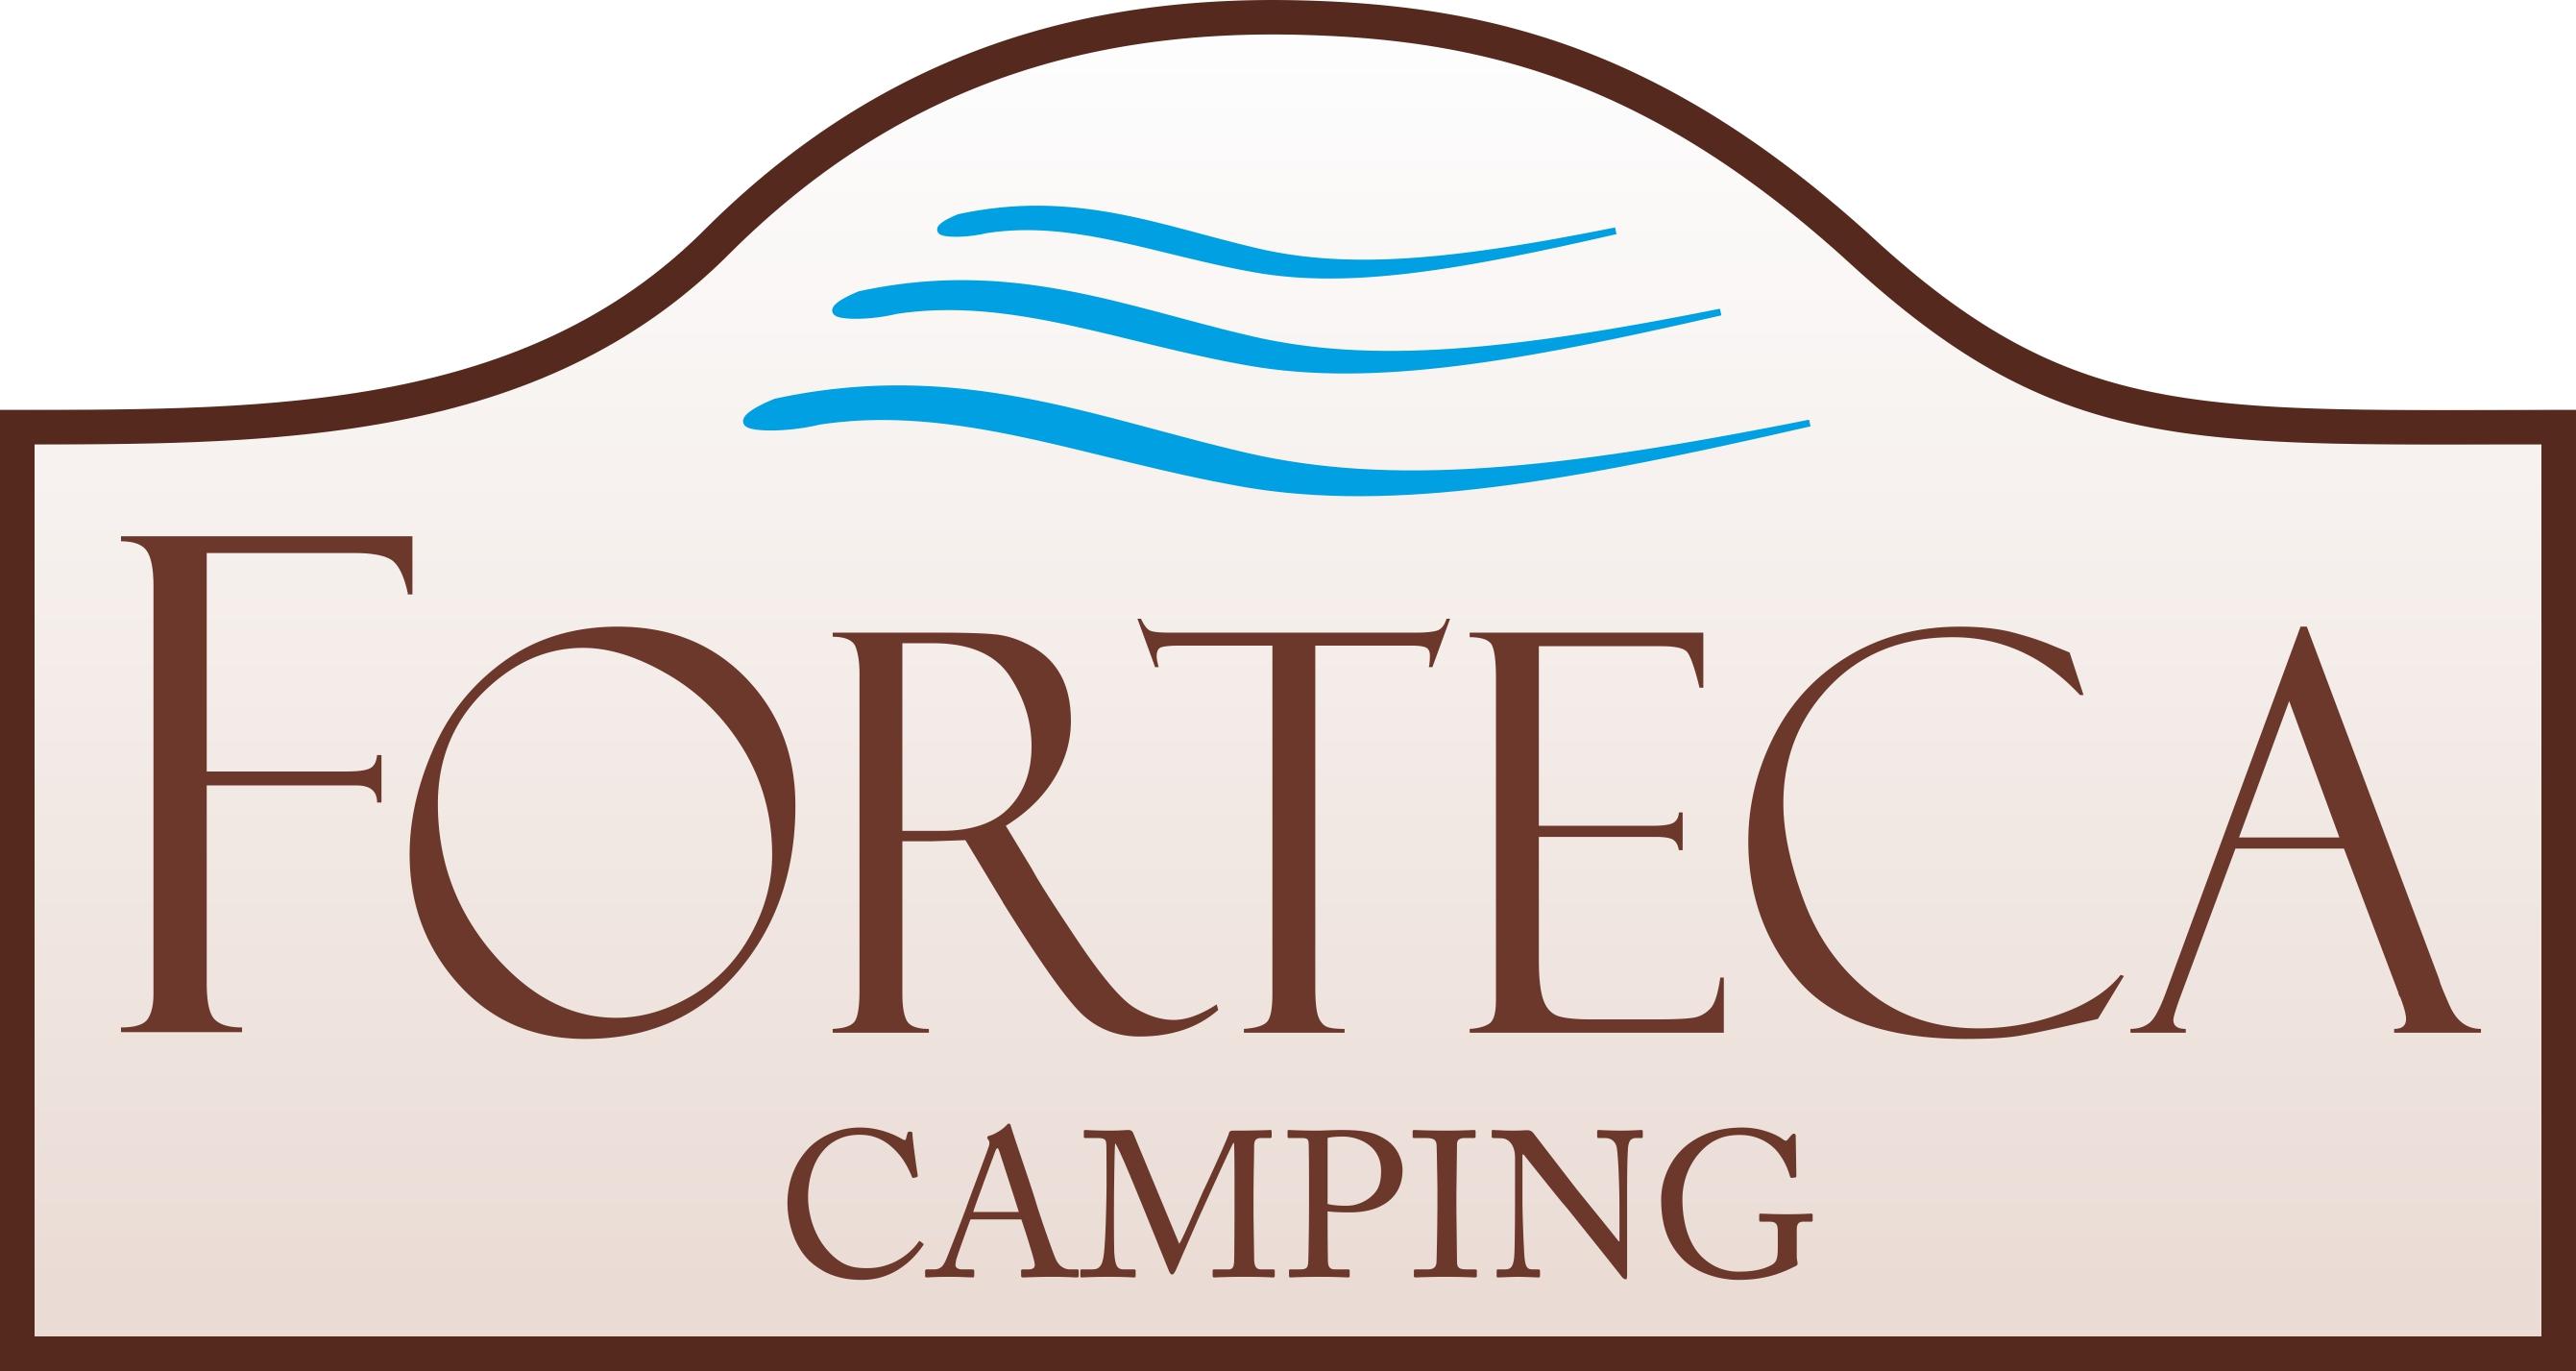 Camping Forteca